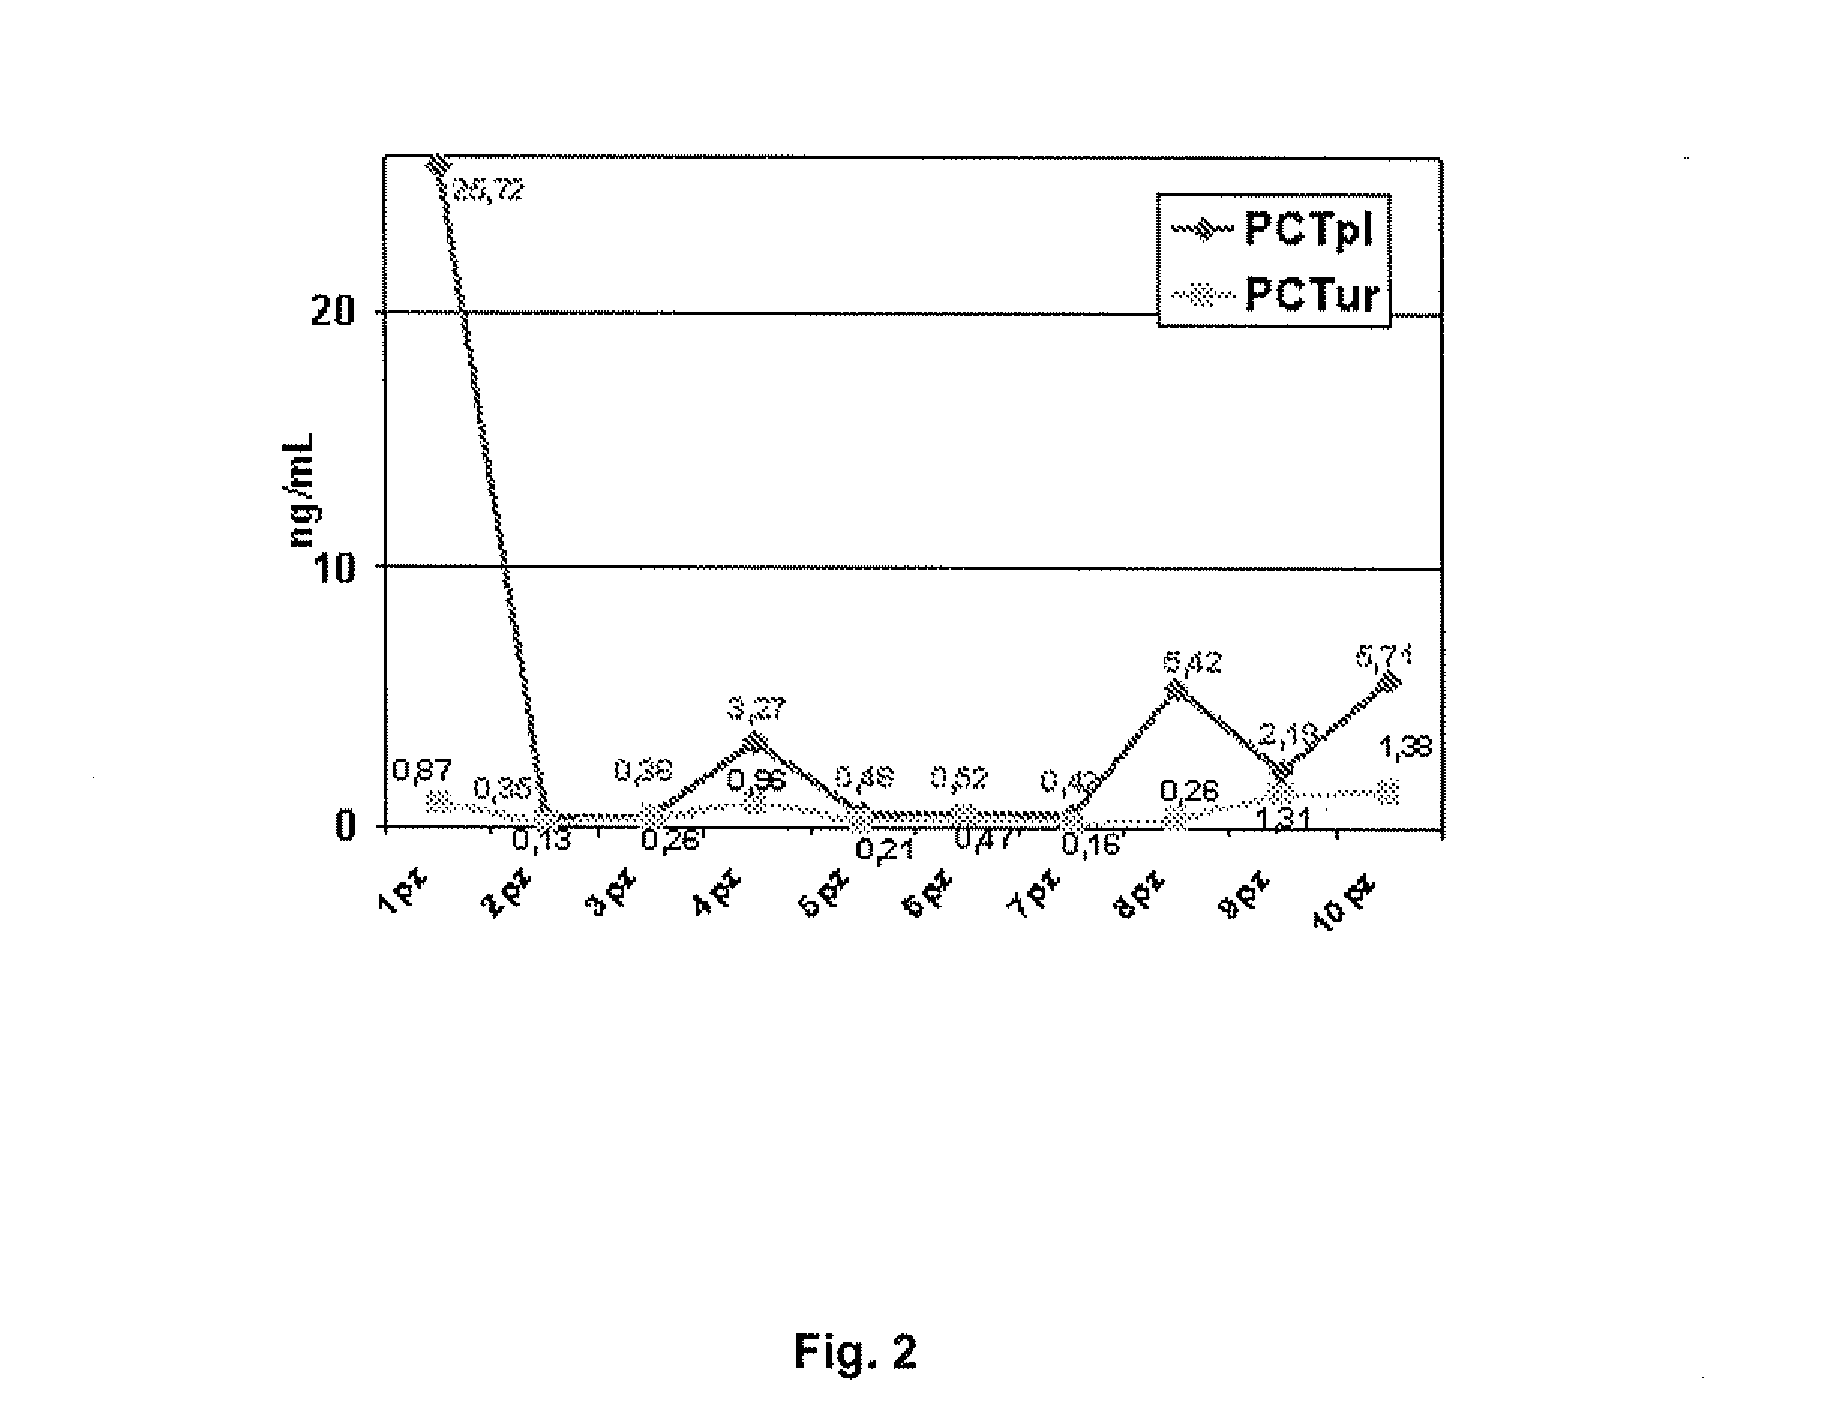 Molecular markers for urinary tract infections